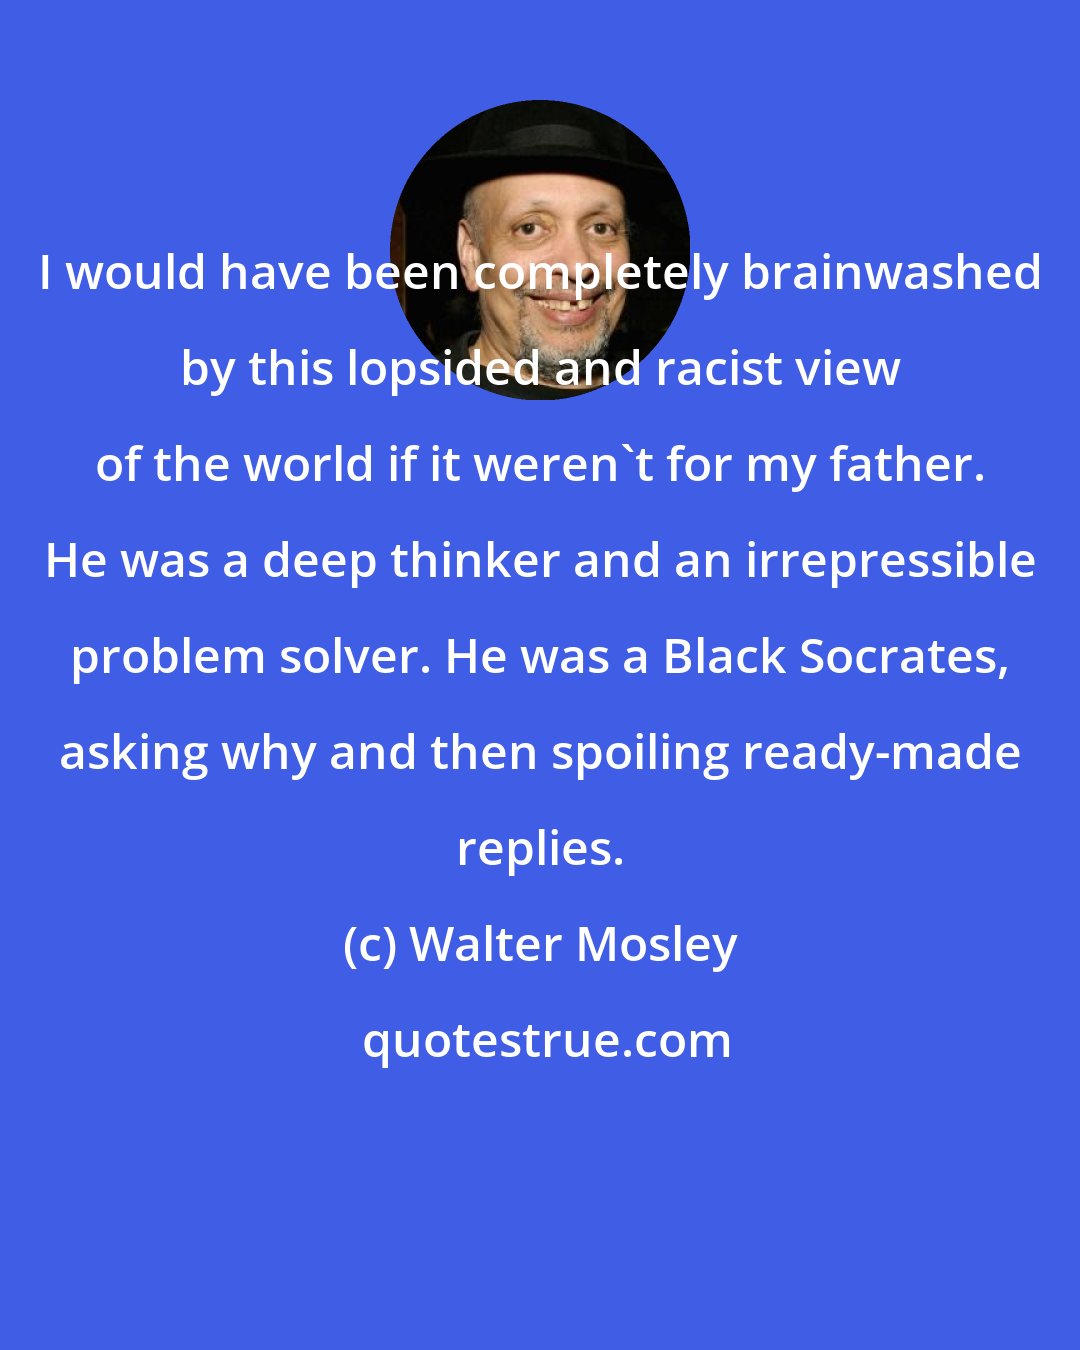 Walter Mosley: I would have been completely brainwashed by this lopsided and racist view of the world if it weren't for my father. He was a deep thinker and an irrepressible problem solver. He was a Black Socrates, asking why and then spoiling ready-made replies.